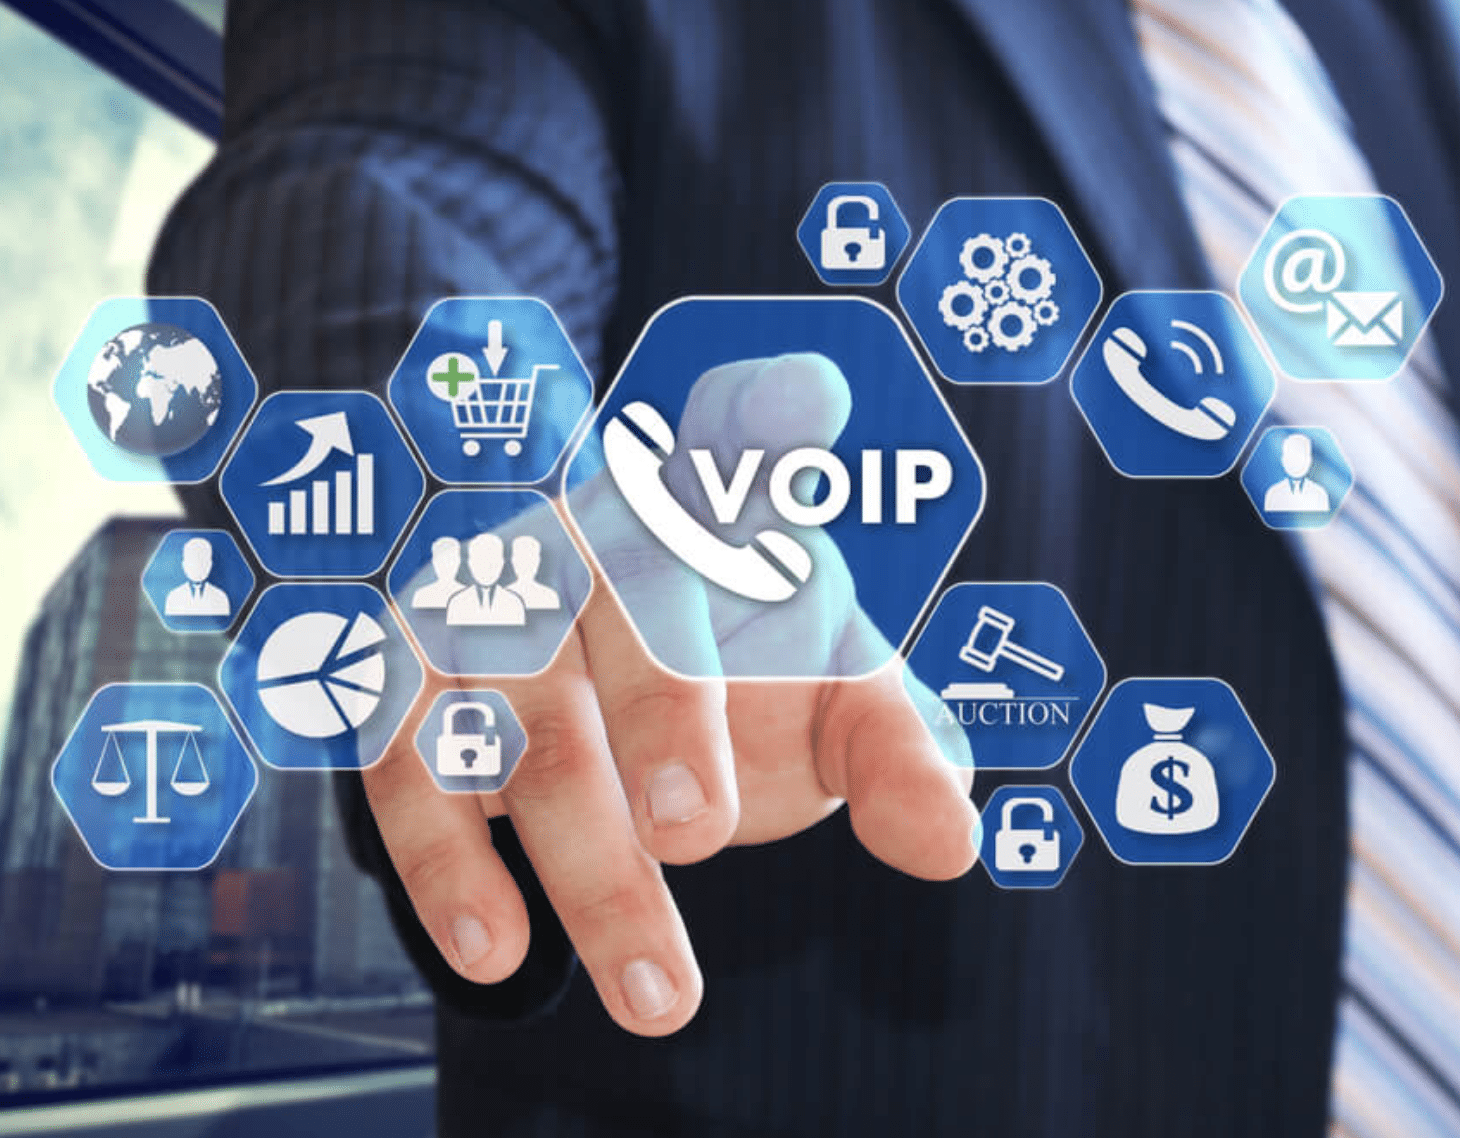 Voip Phone Displayed System